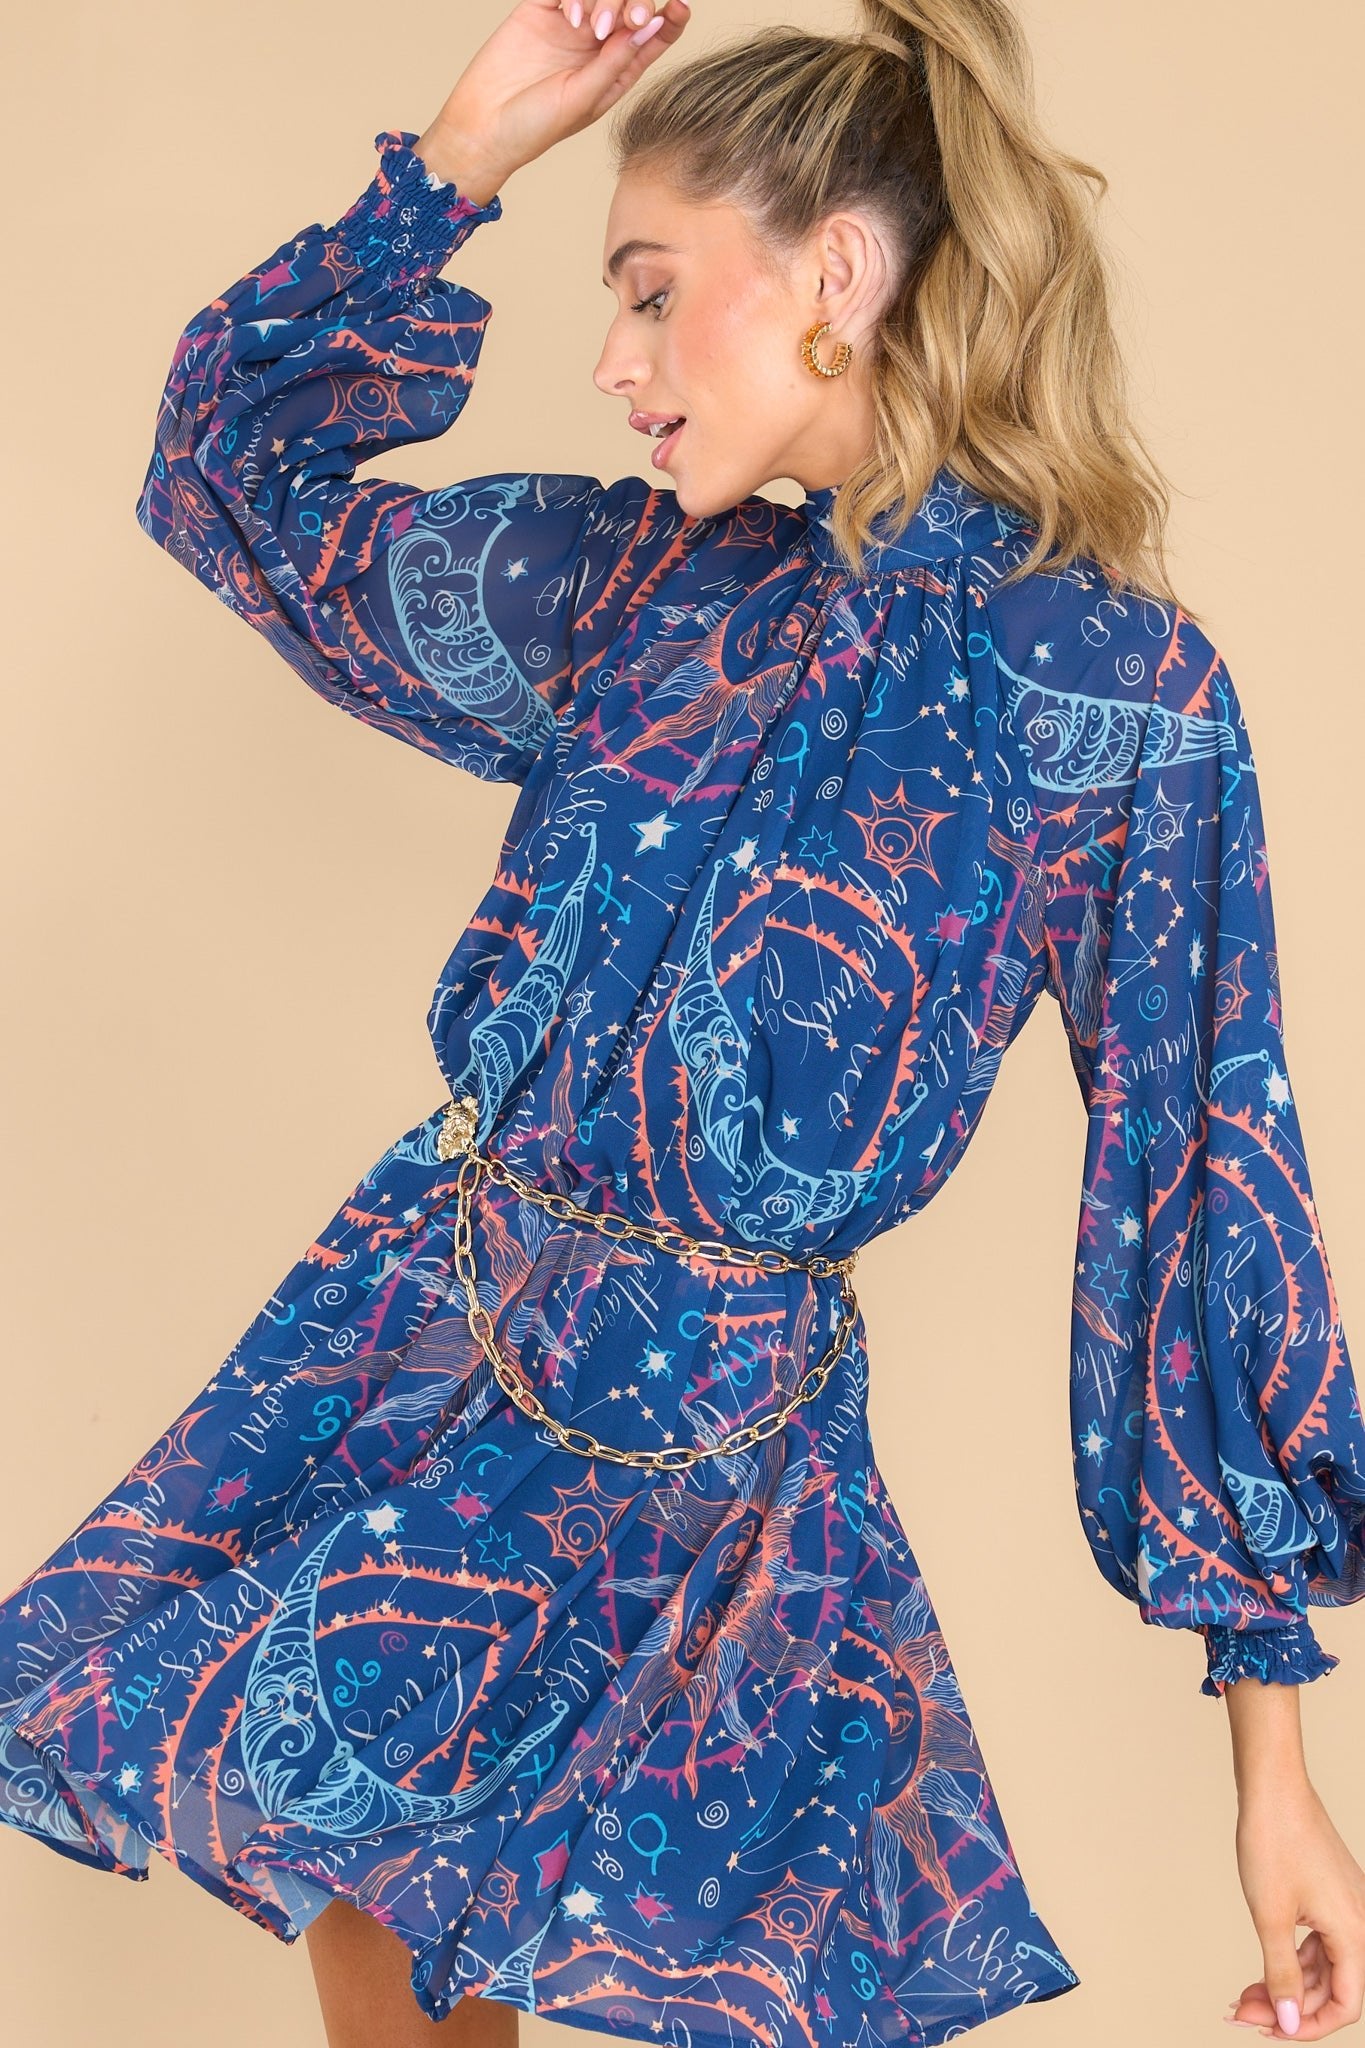 Front view of this dress that showcases the movement of the fabric in a twirling motion.